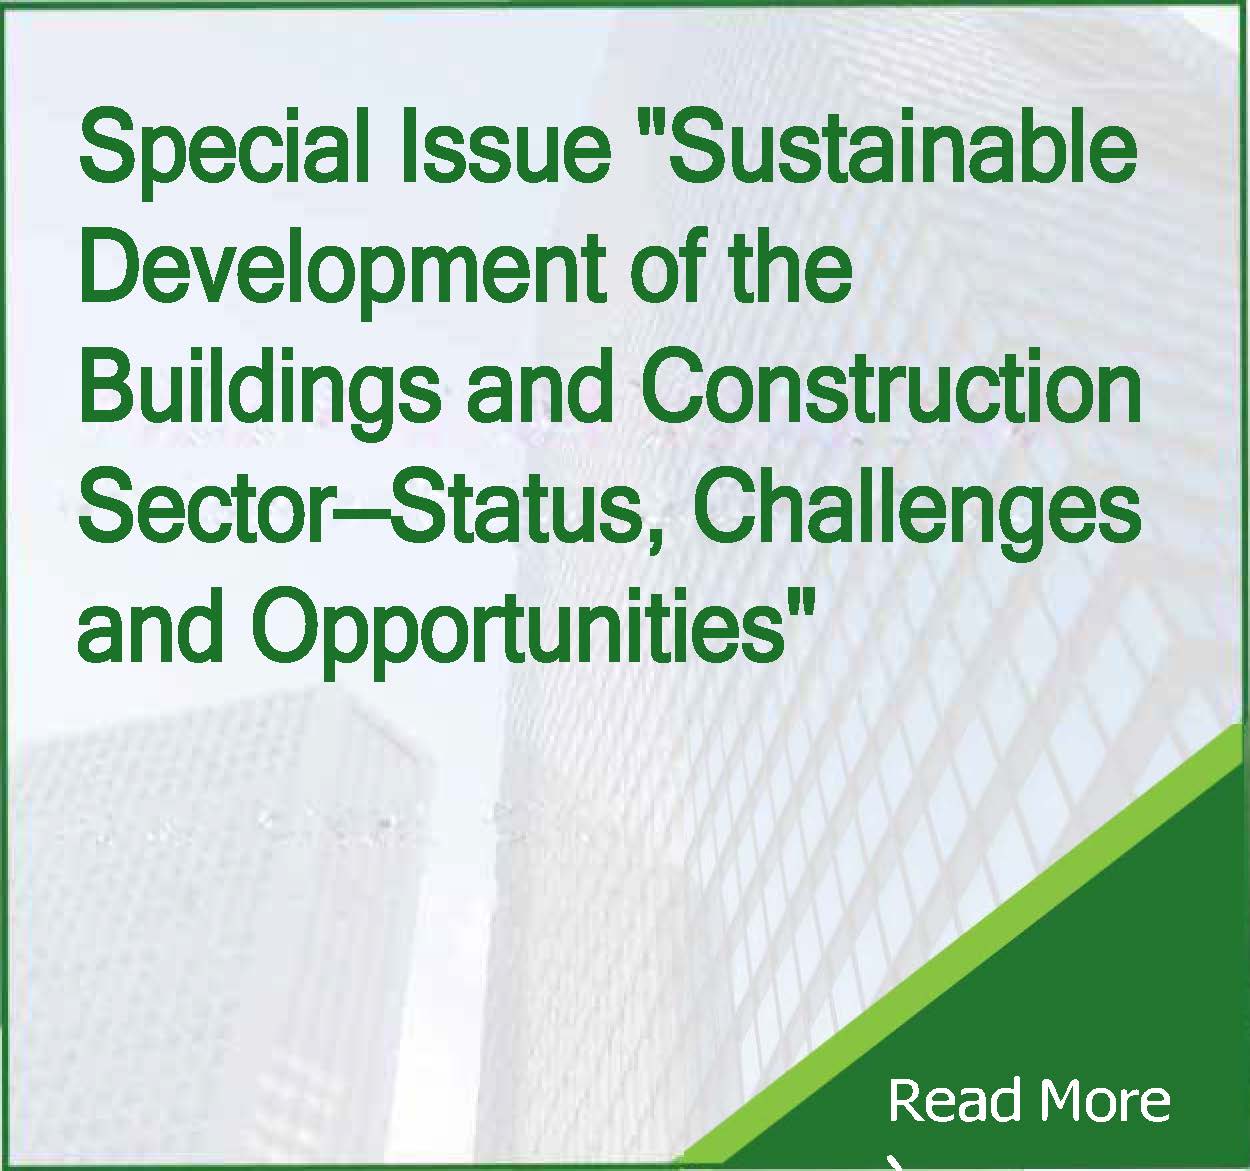 Special Issue “Sustainable Development of the Buildings and Construction Sector—Status, Challenges and Opportunities”